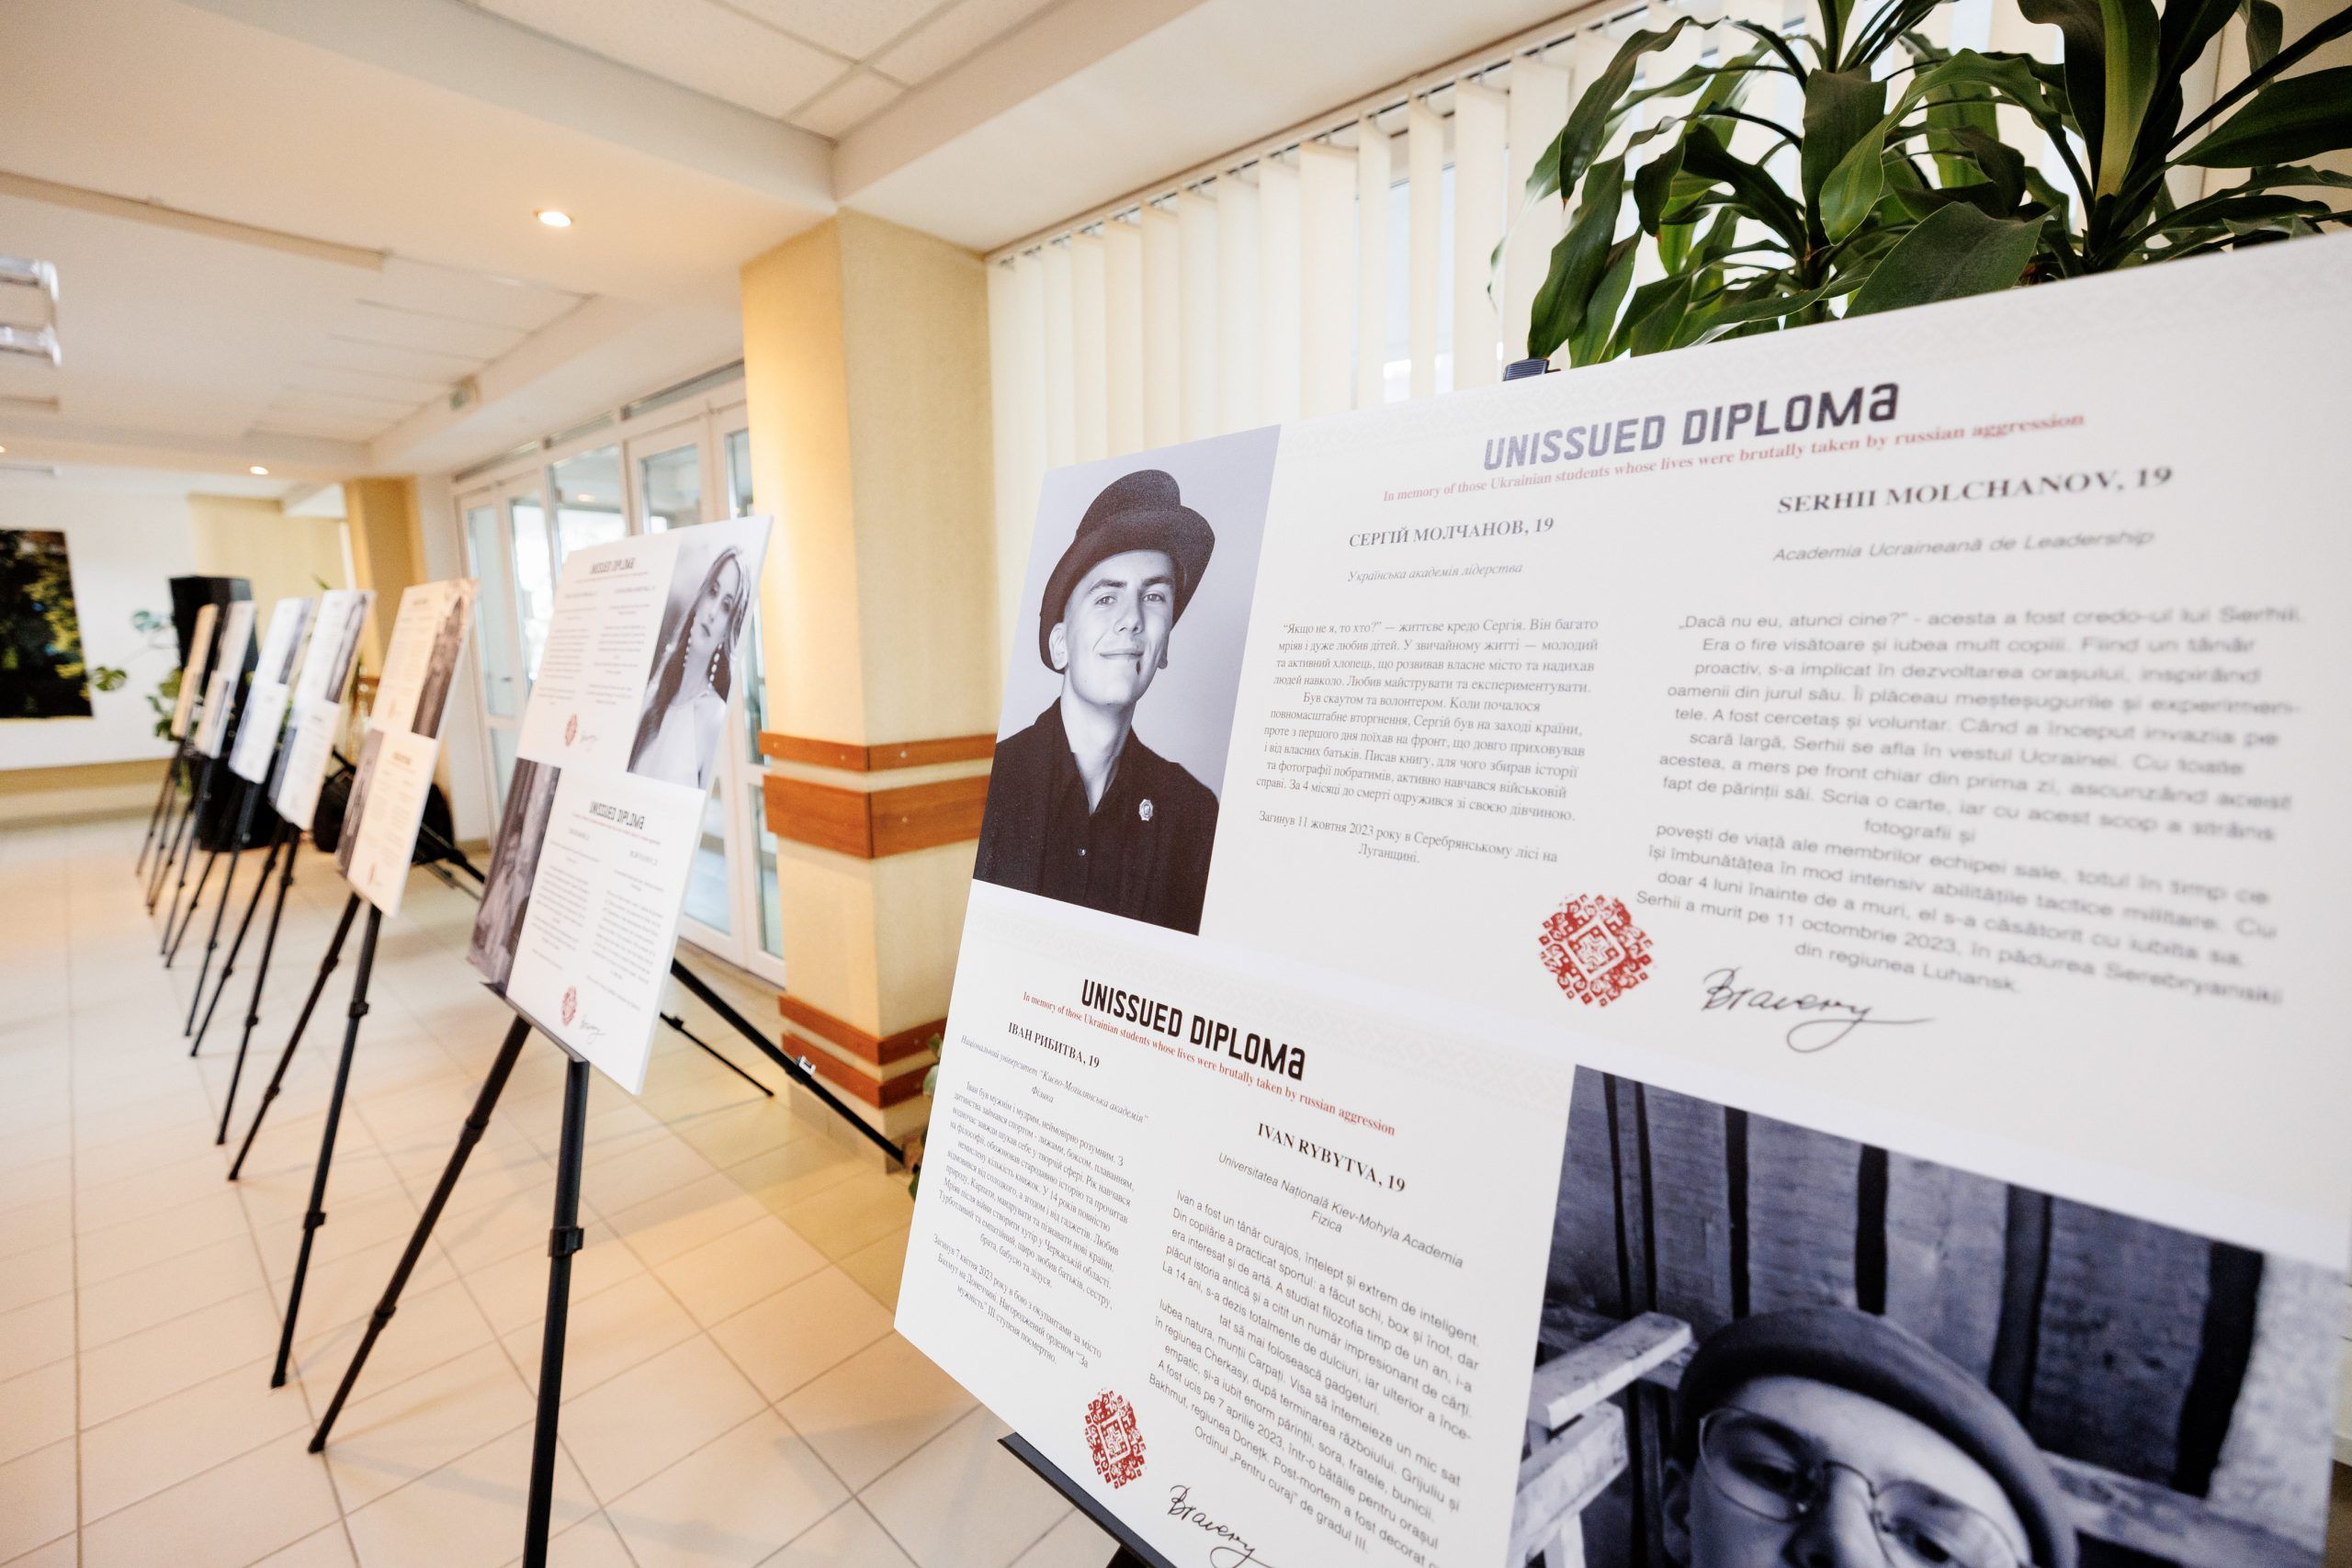 "Unissued Diplomas" exhibition launch at Moldova State University